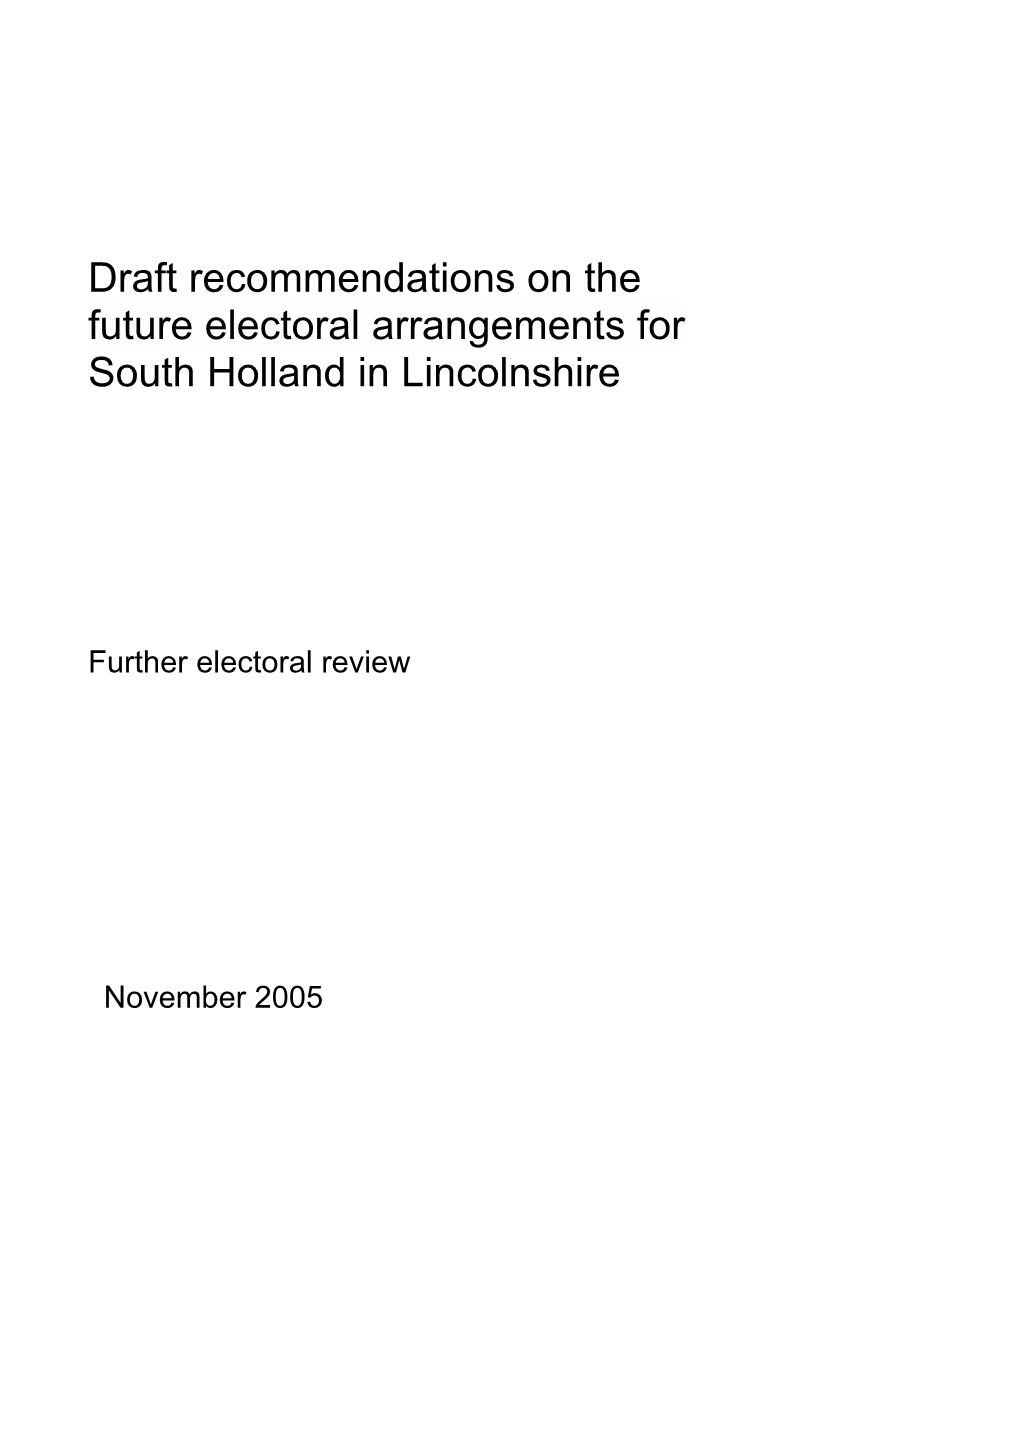 Draft Recommendations on the Future Electoral Arrangements for South Holland in Lincolnshire